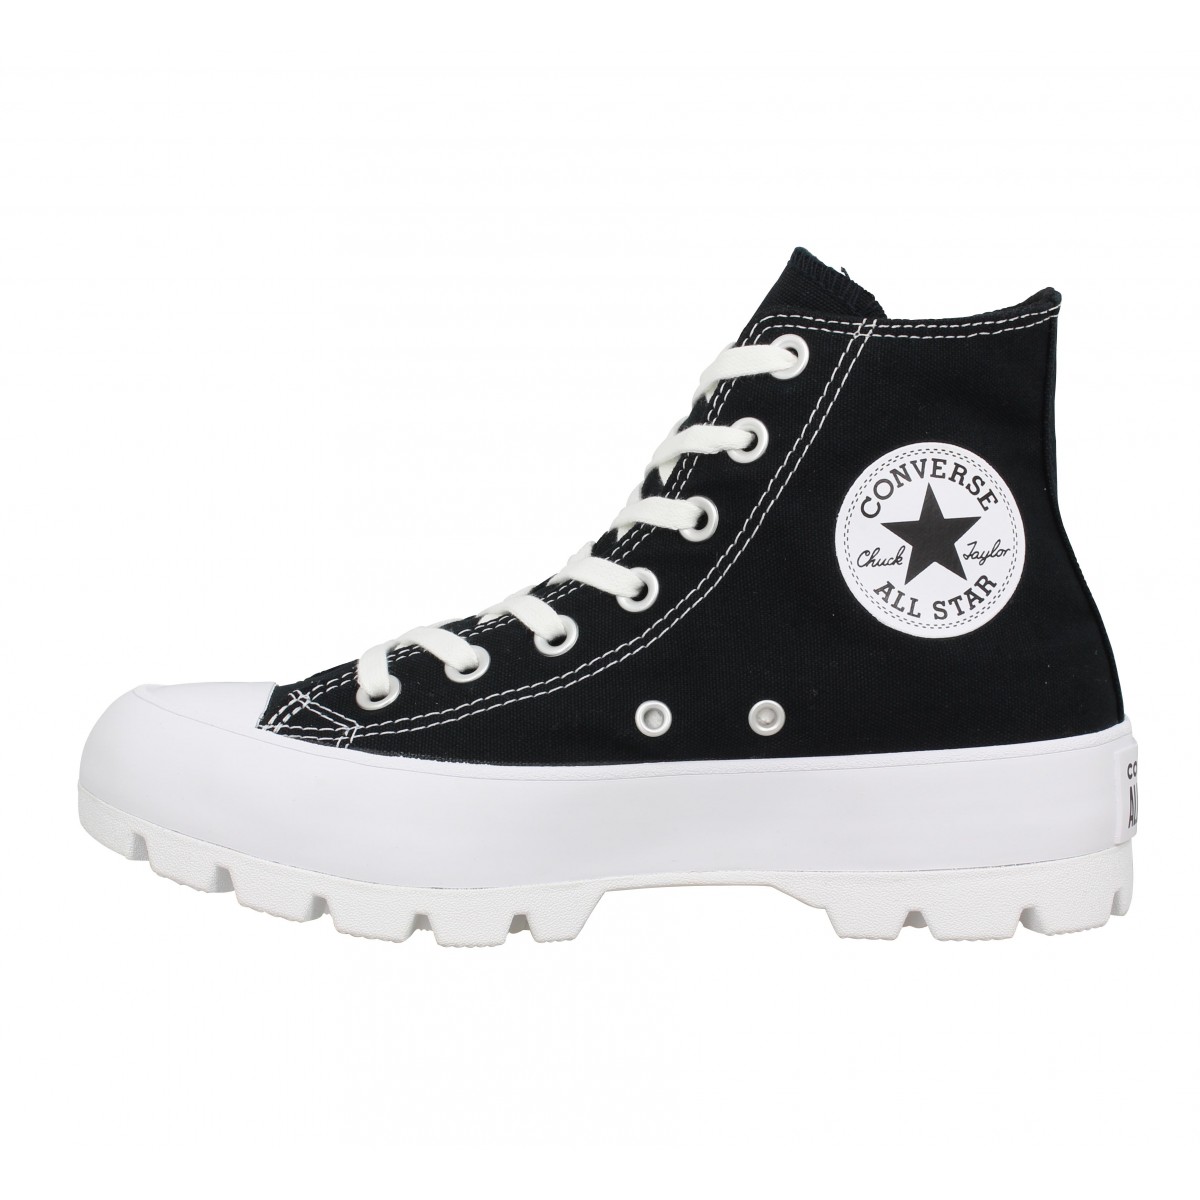 Chaussures Converse chuck taylor all star lugged hi toile femme noir femme  | Fanny chaussures